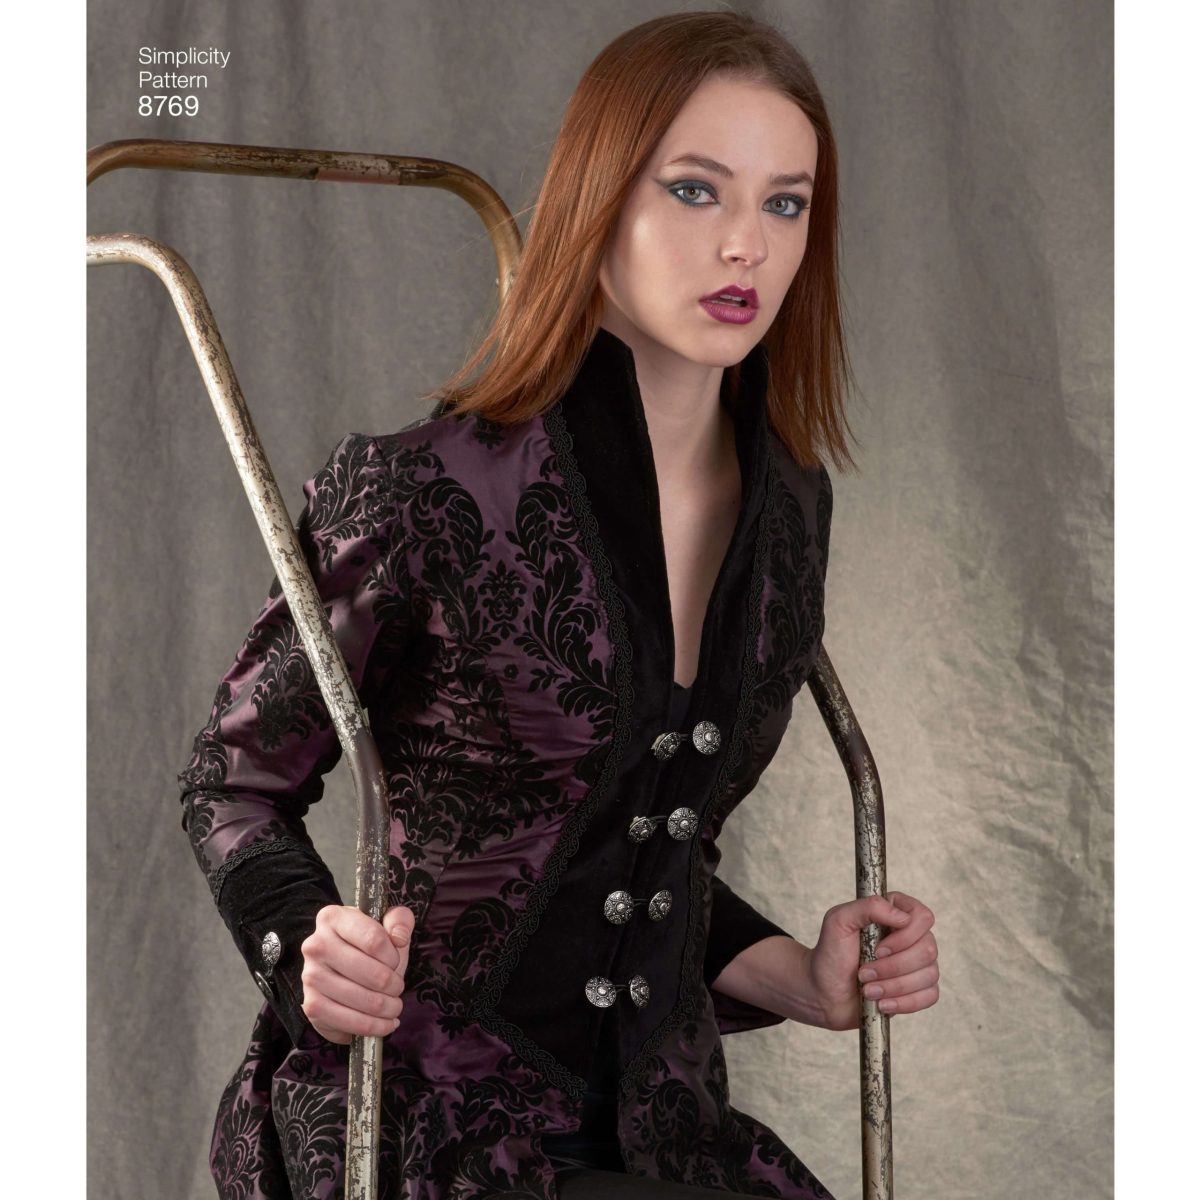 Simplicity Sewing Pattern 8769 Women's Costume Coats